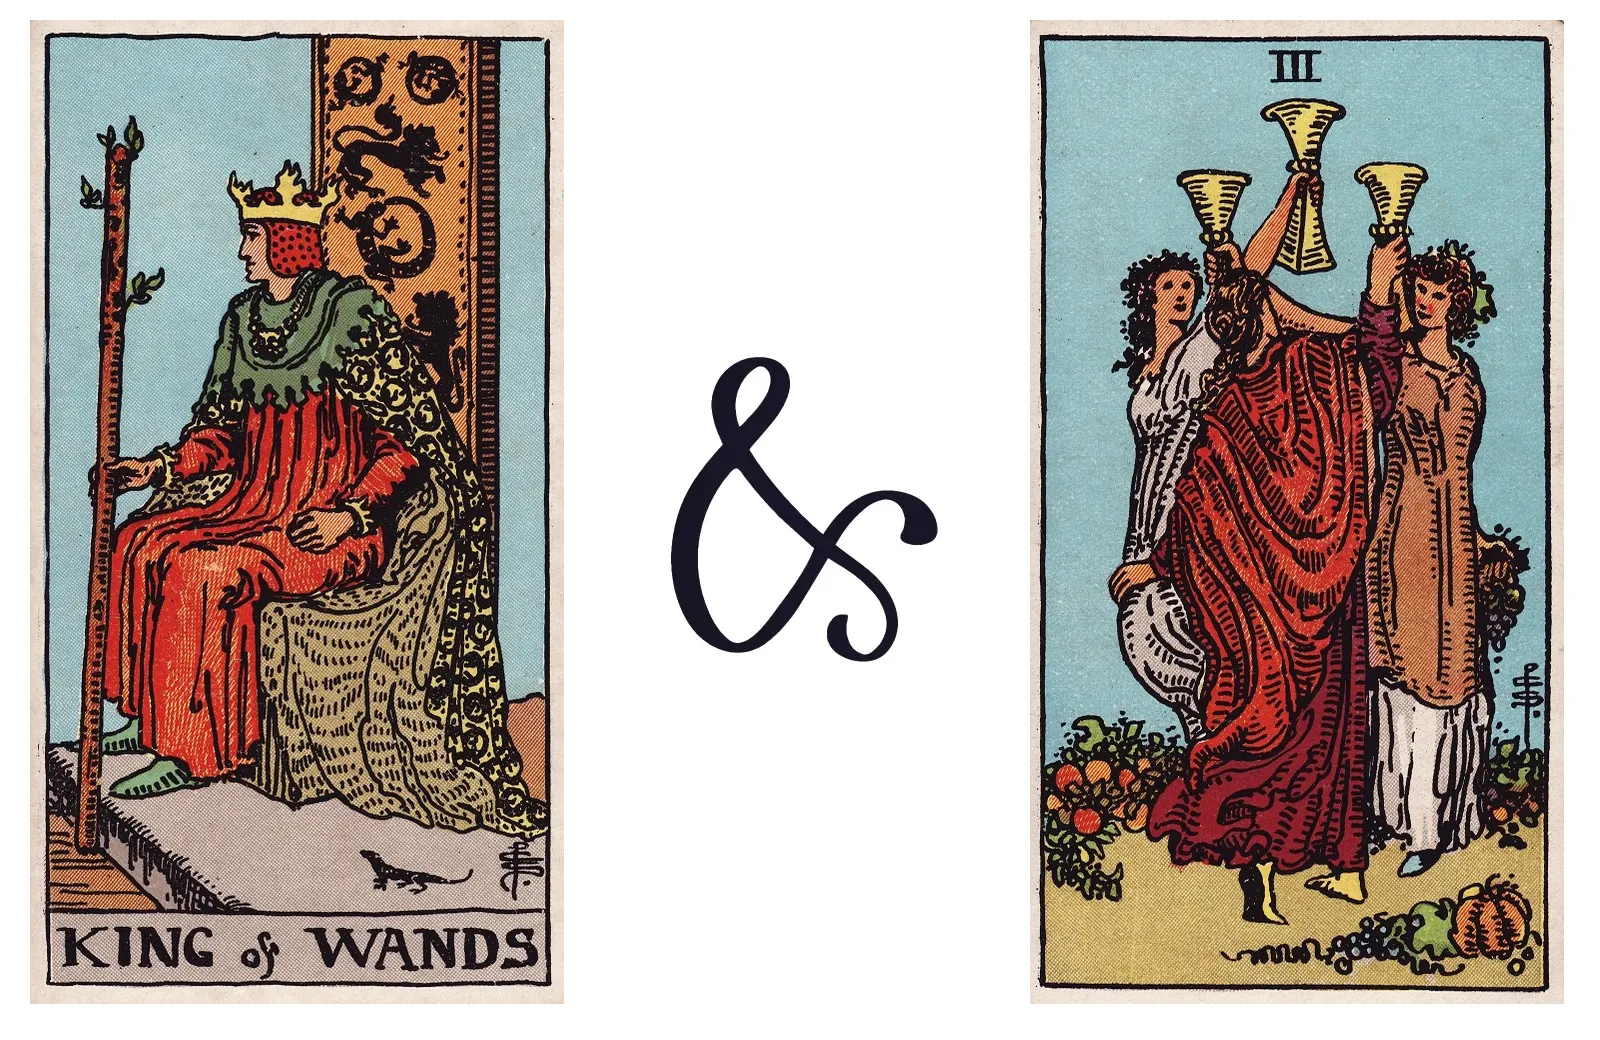 King of Wands and Three of Cups